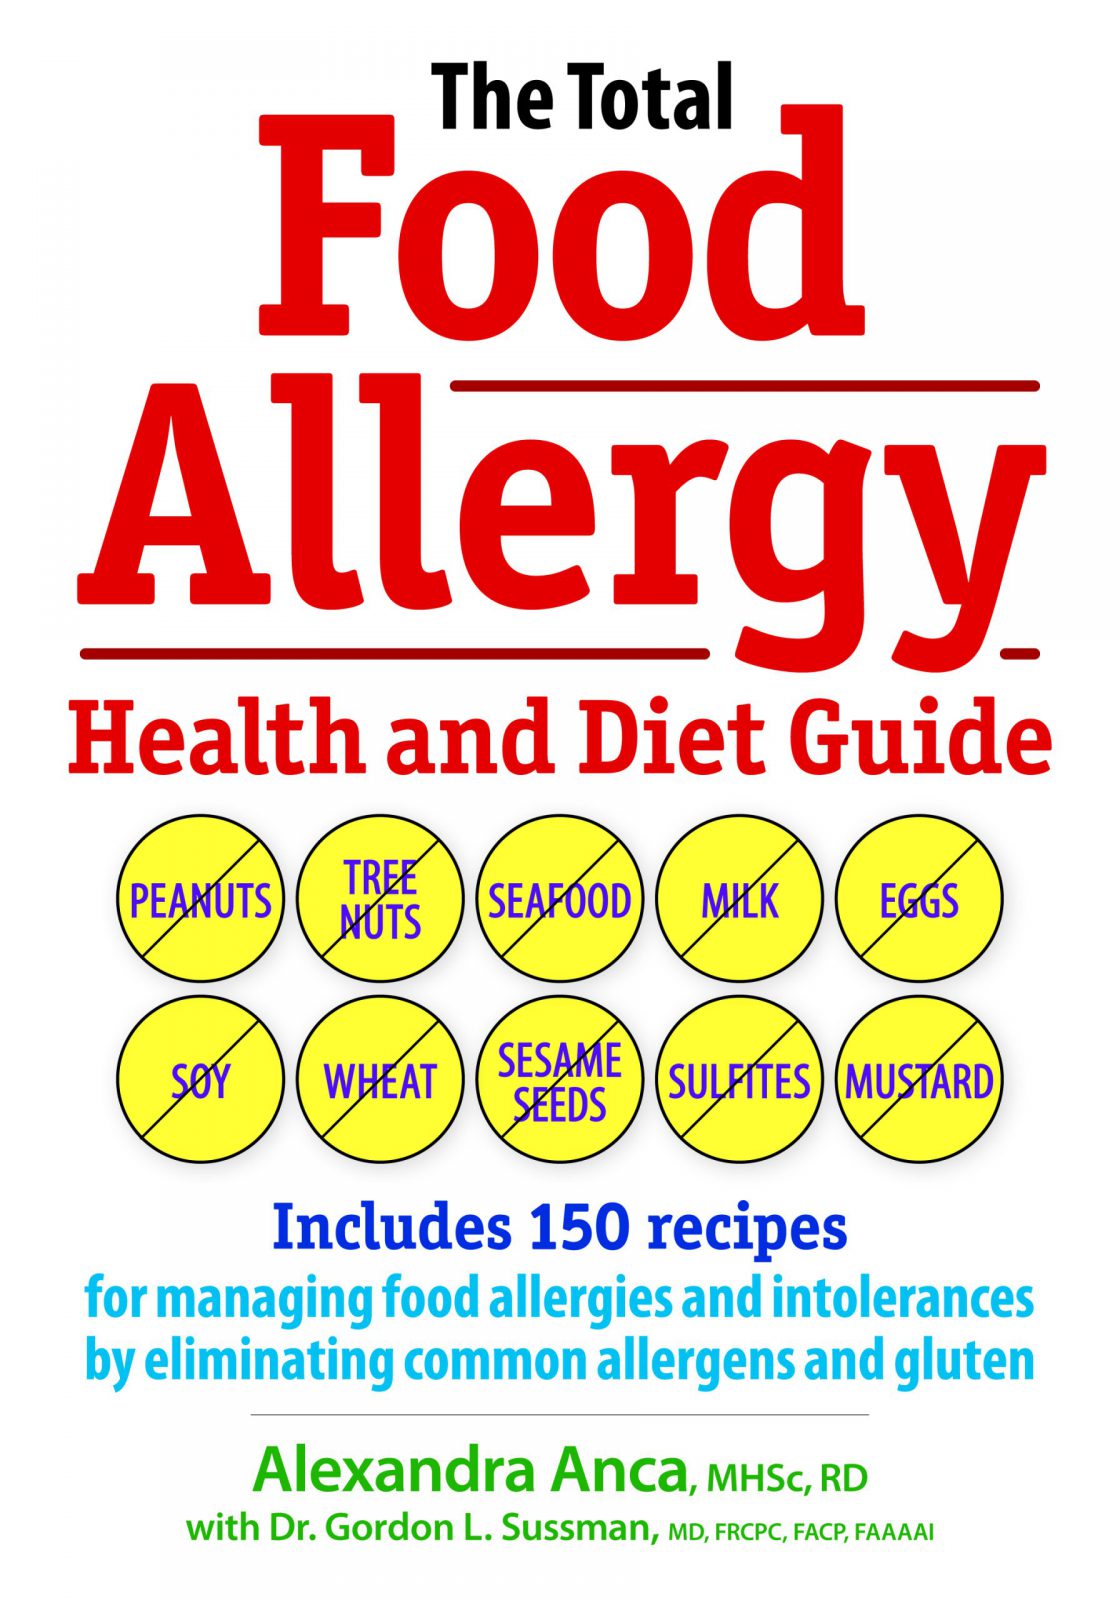 The Total Food Allergy Health and Diet Guide